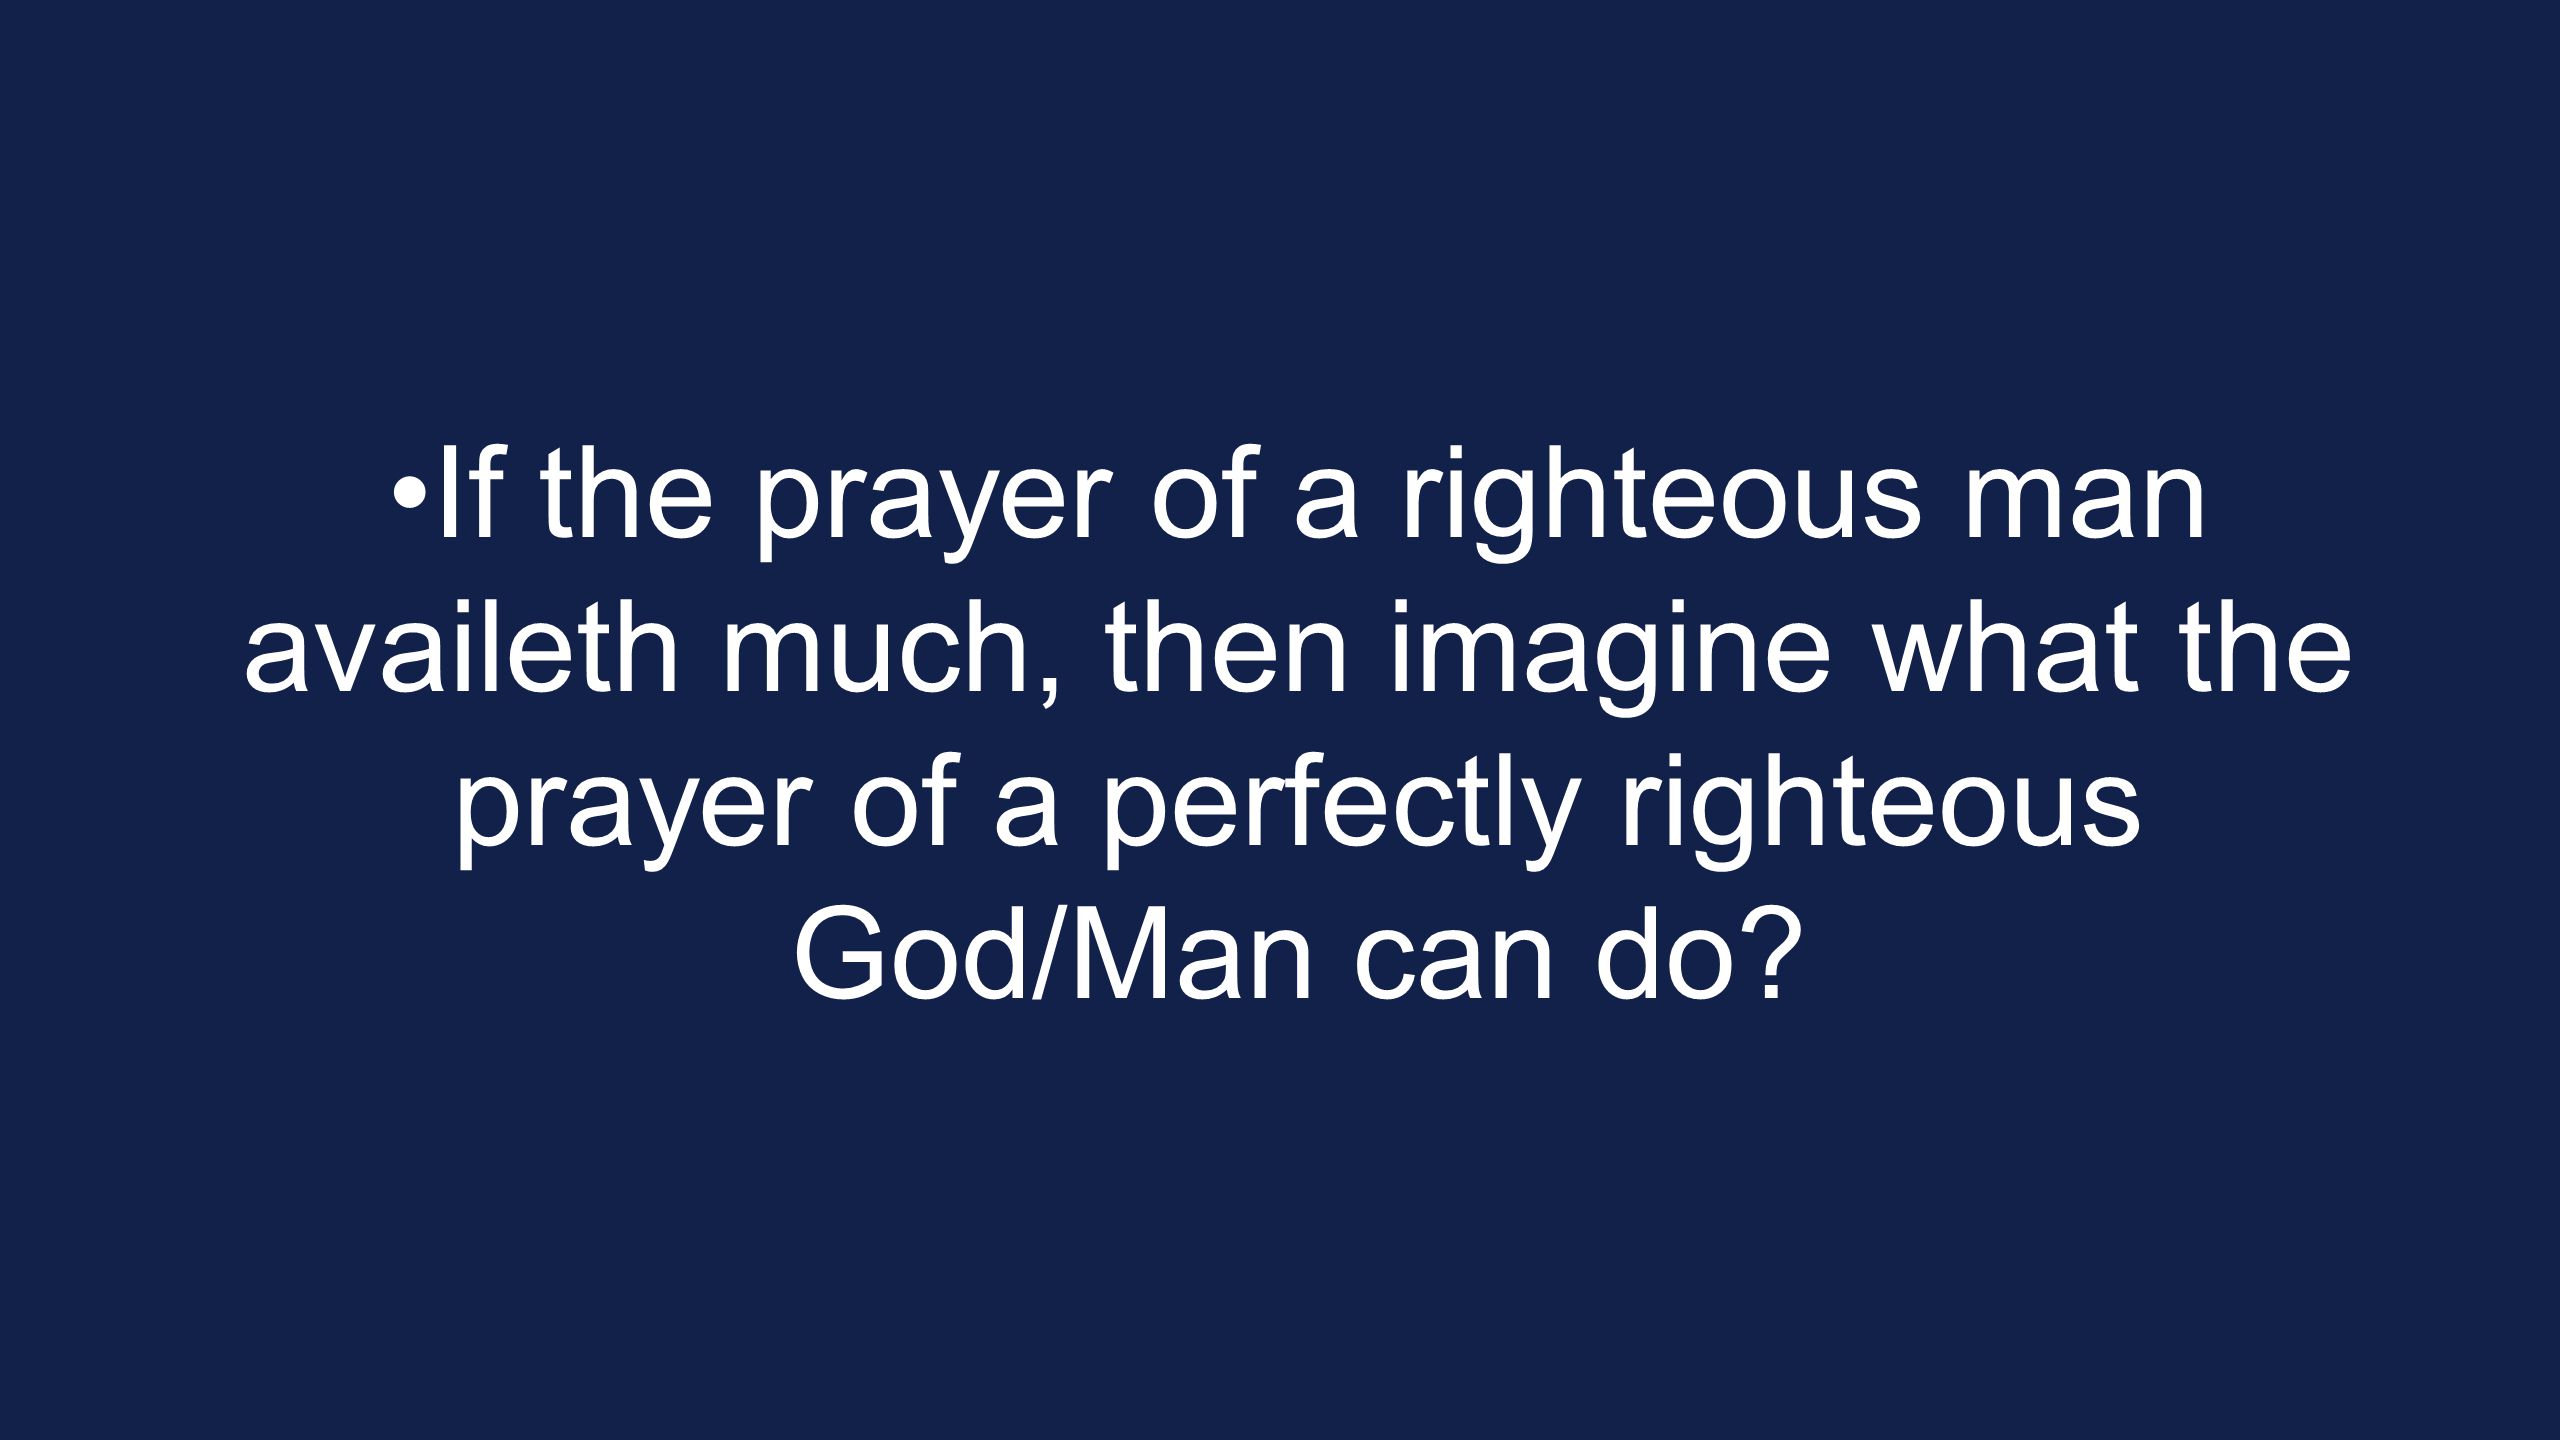 If the prayer of a righteous man availeth much, then imagine what the prayer of a perfectly righteous God/Man can do